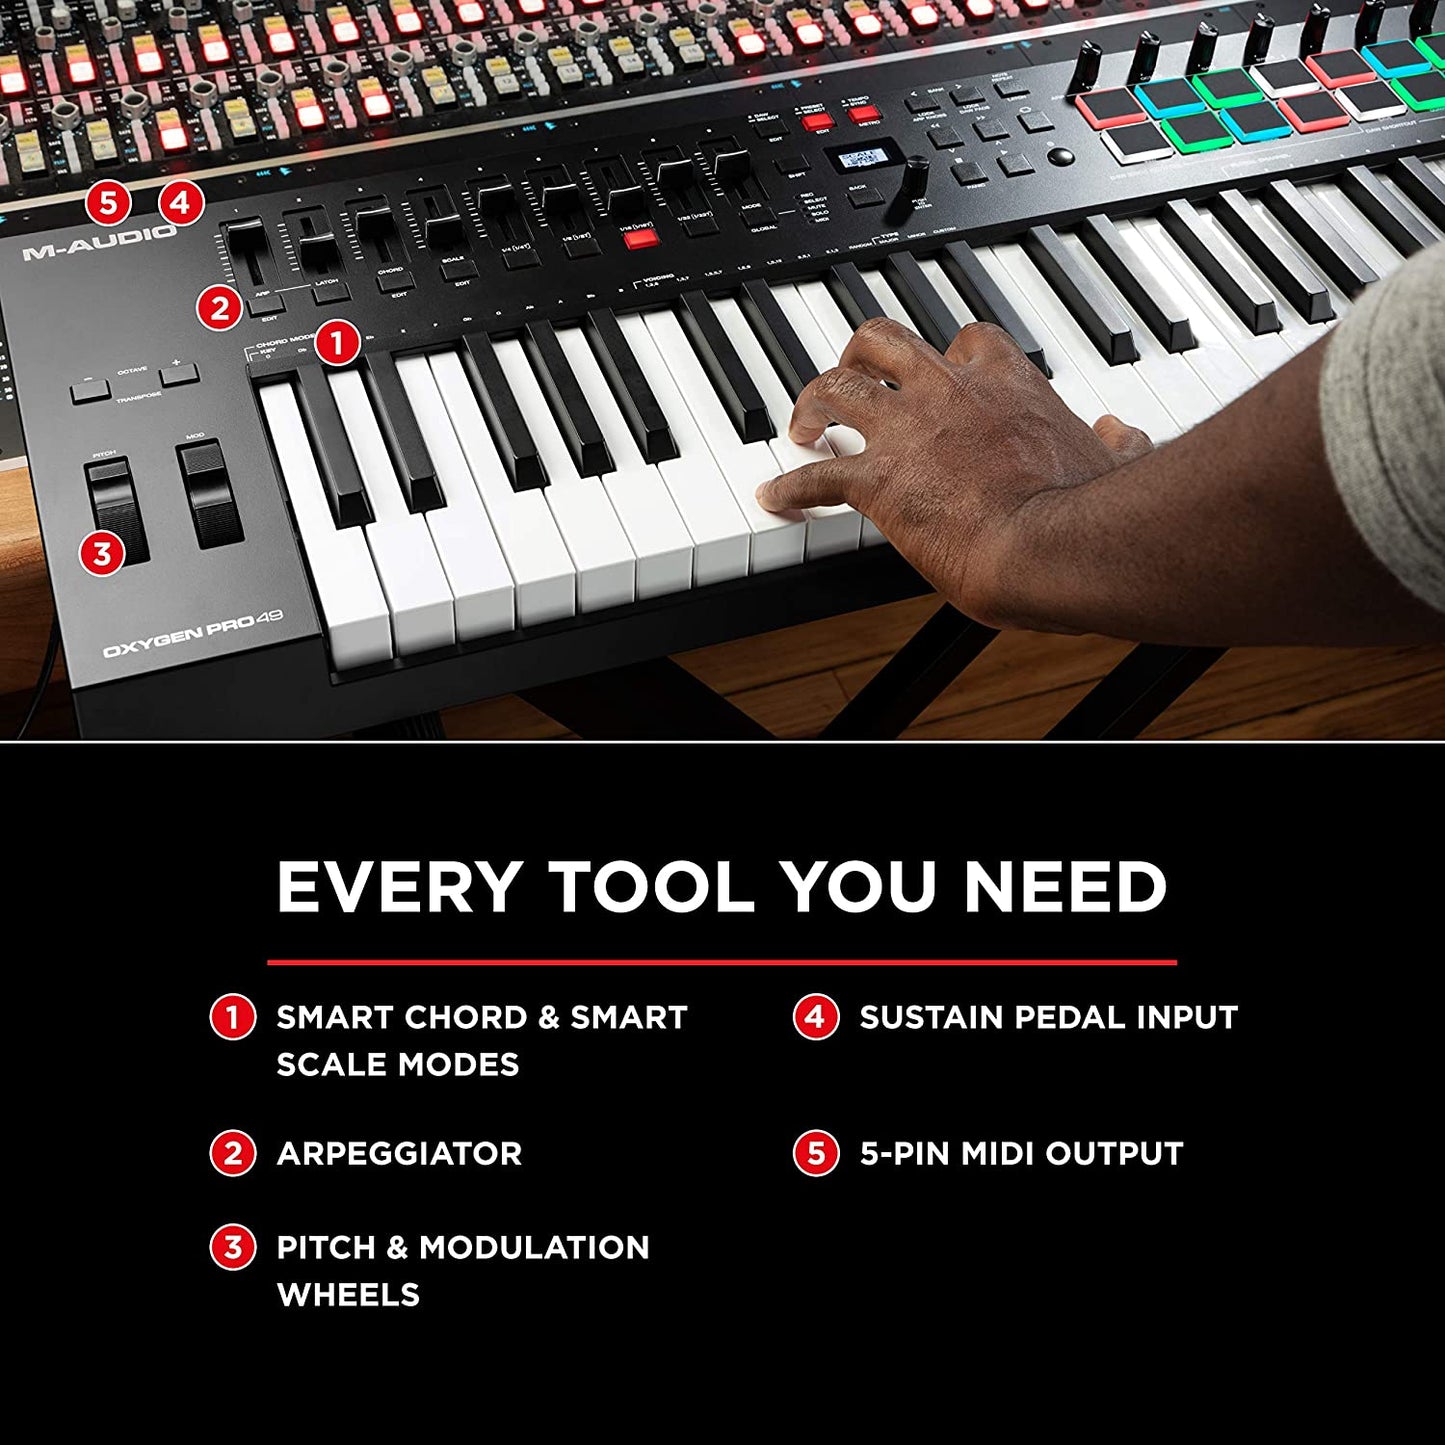 M-Audio Oxygen Pro 49 Powerful, 49-key USB Powered MIDI Controller with Smart Controls and Auto-mapping